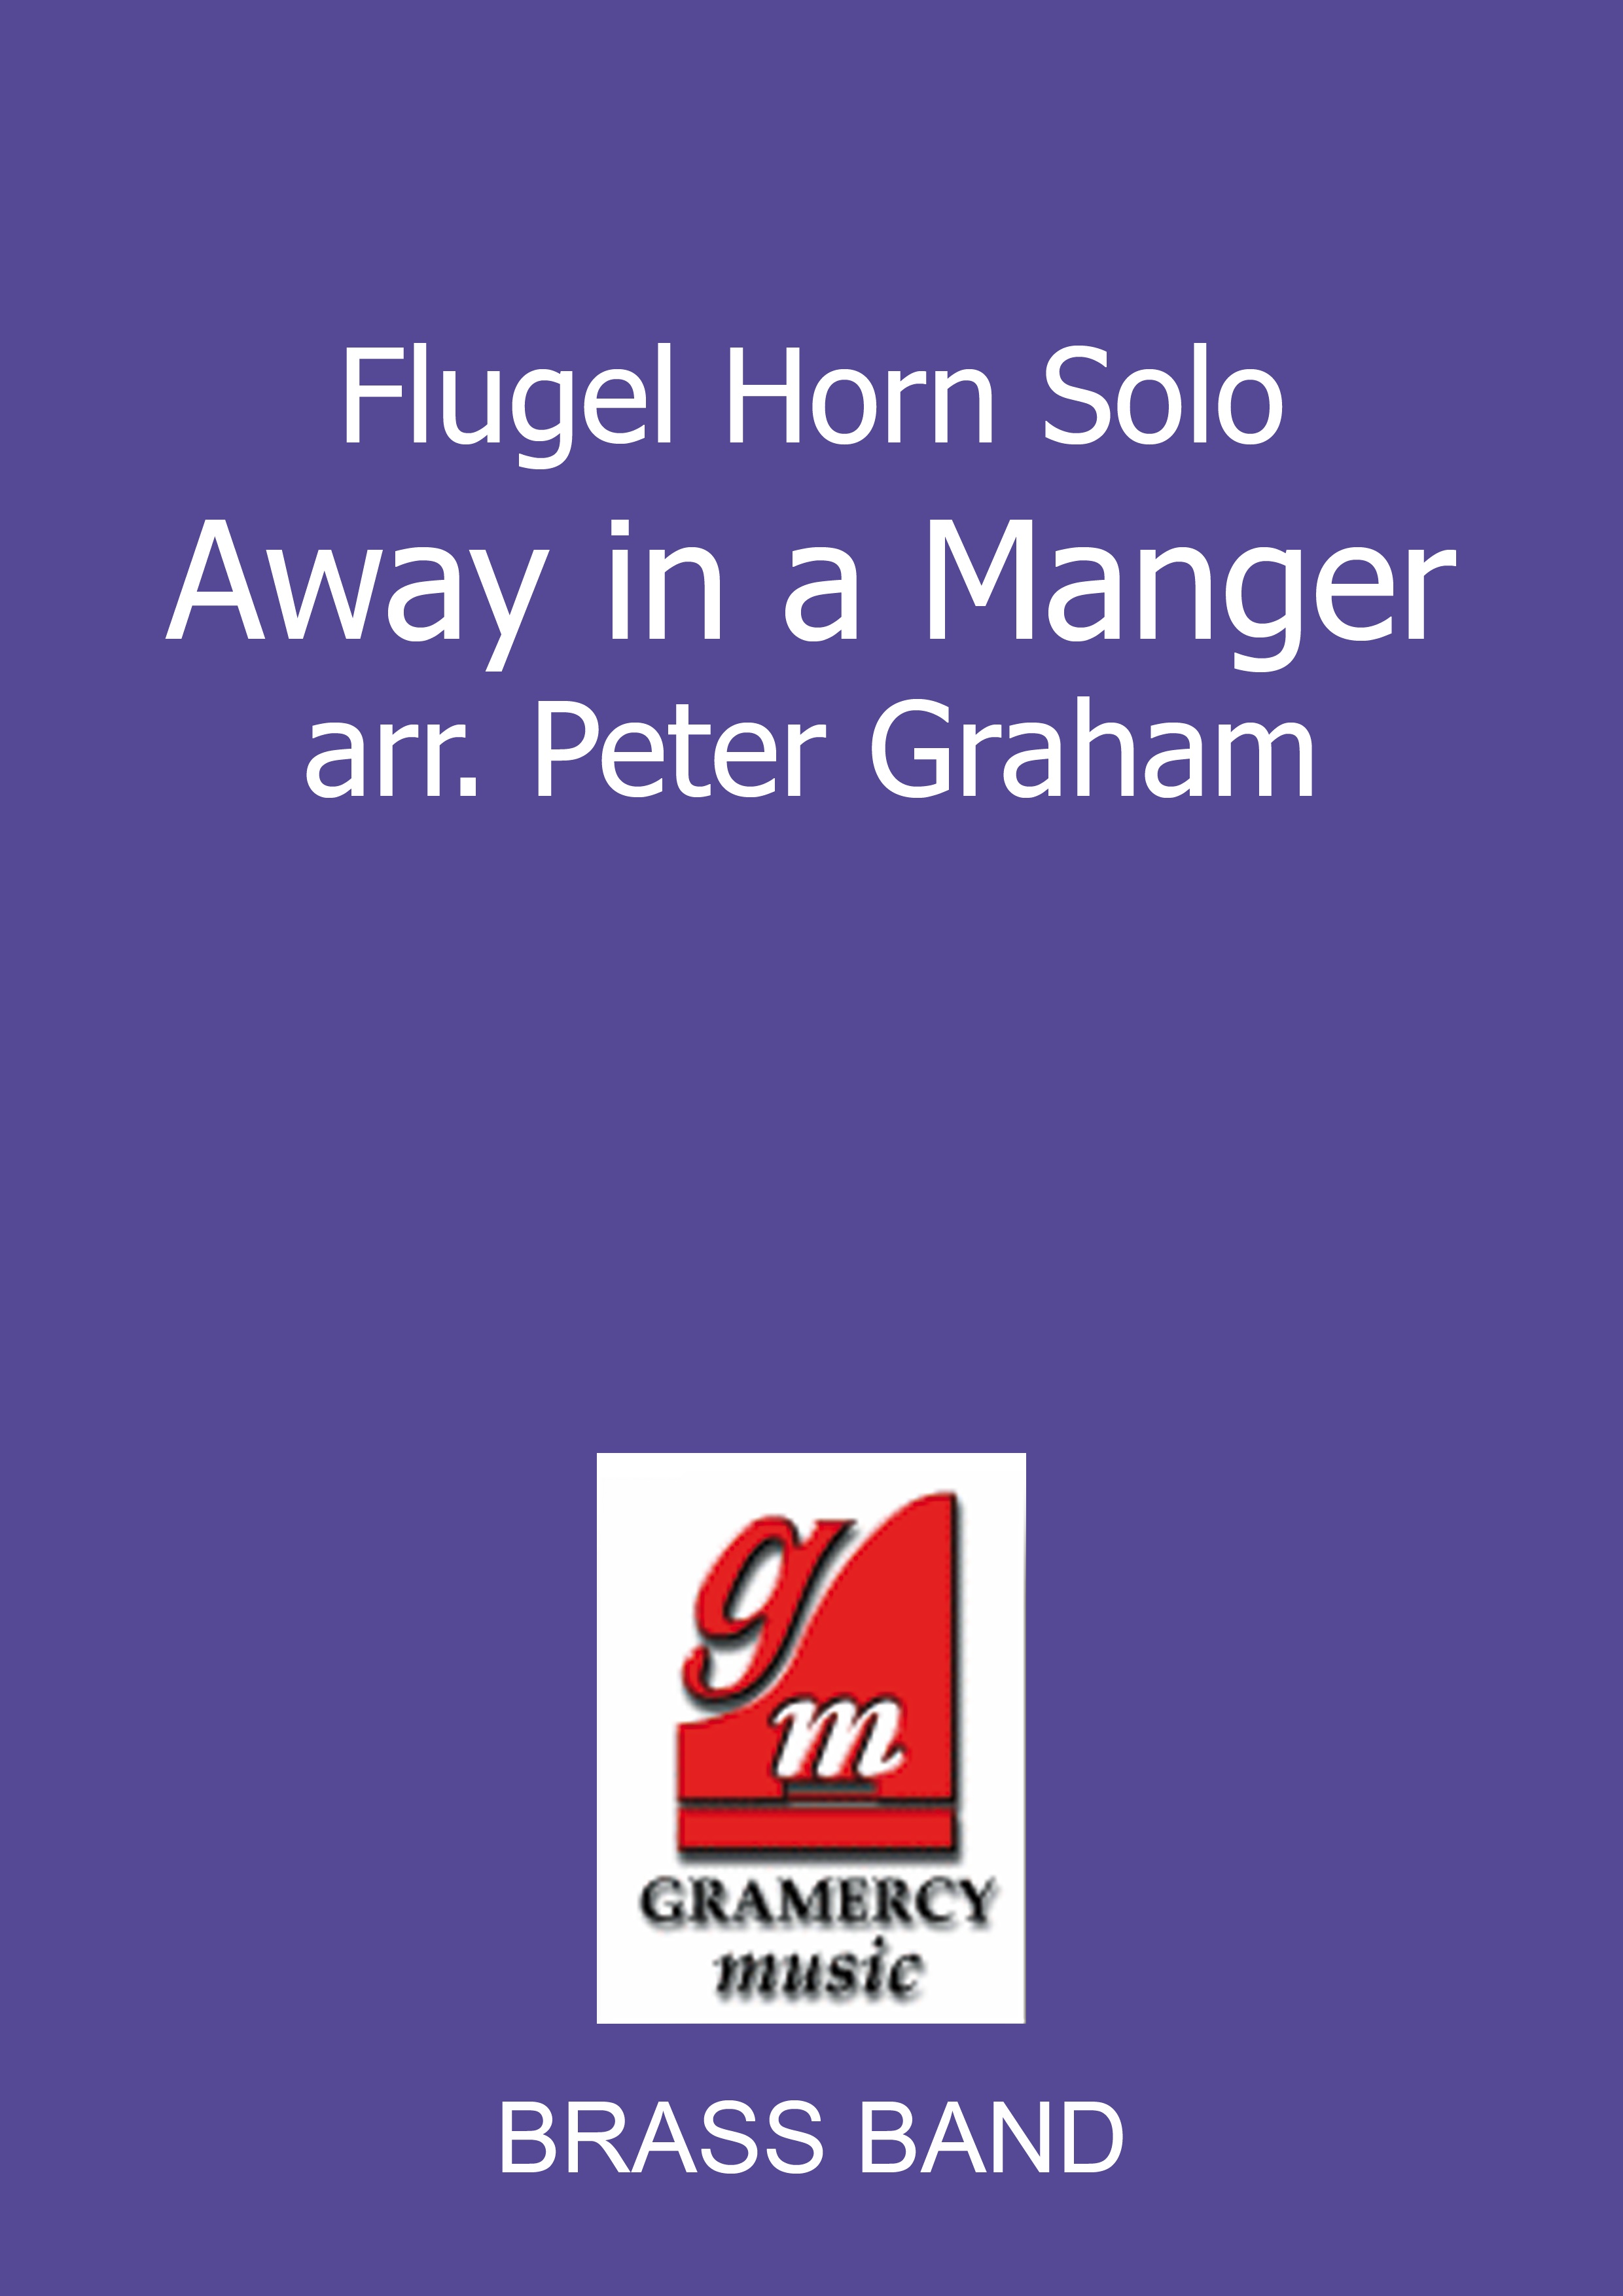 Away in a Manger (Flugel Horn Solo with Brass Band)